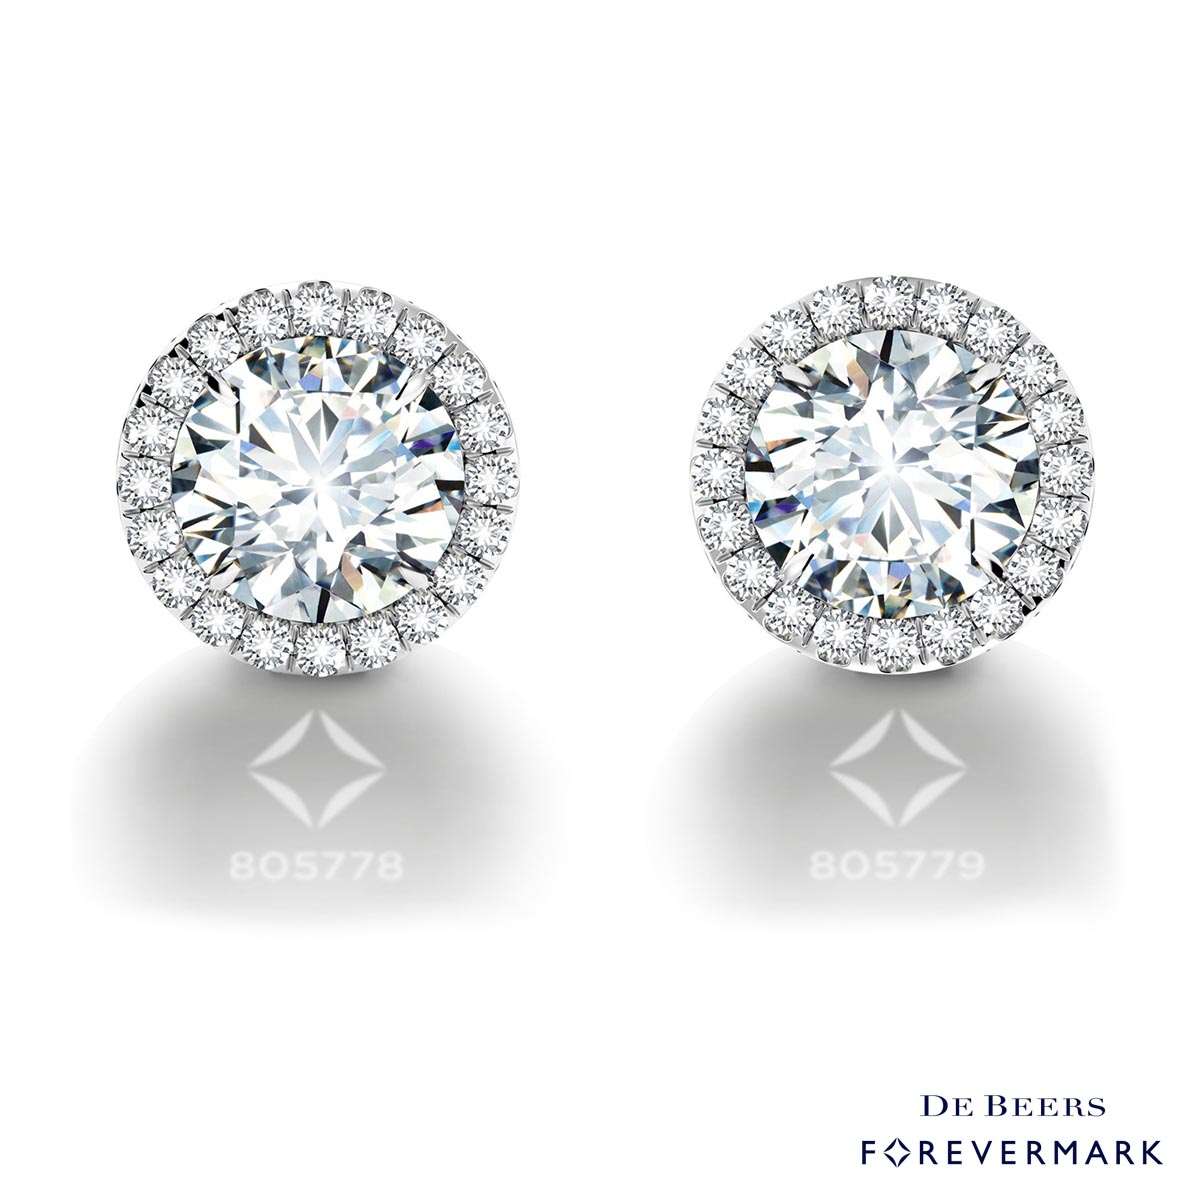 De Beers Forevermark Center of My Universe Diamond Halo Earrings in 18kt White Gold (1/2ct tw)